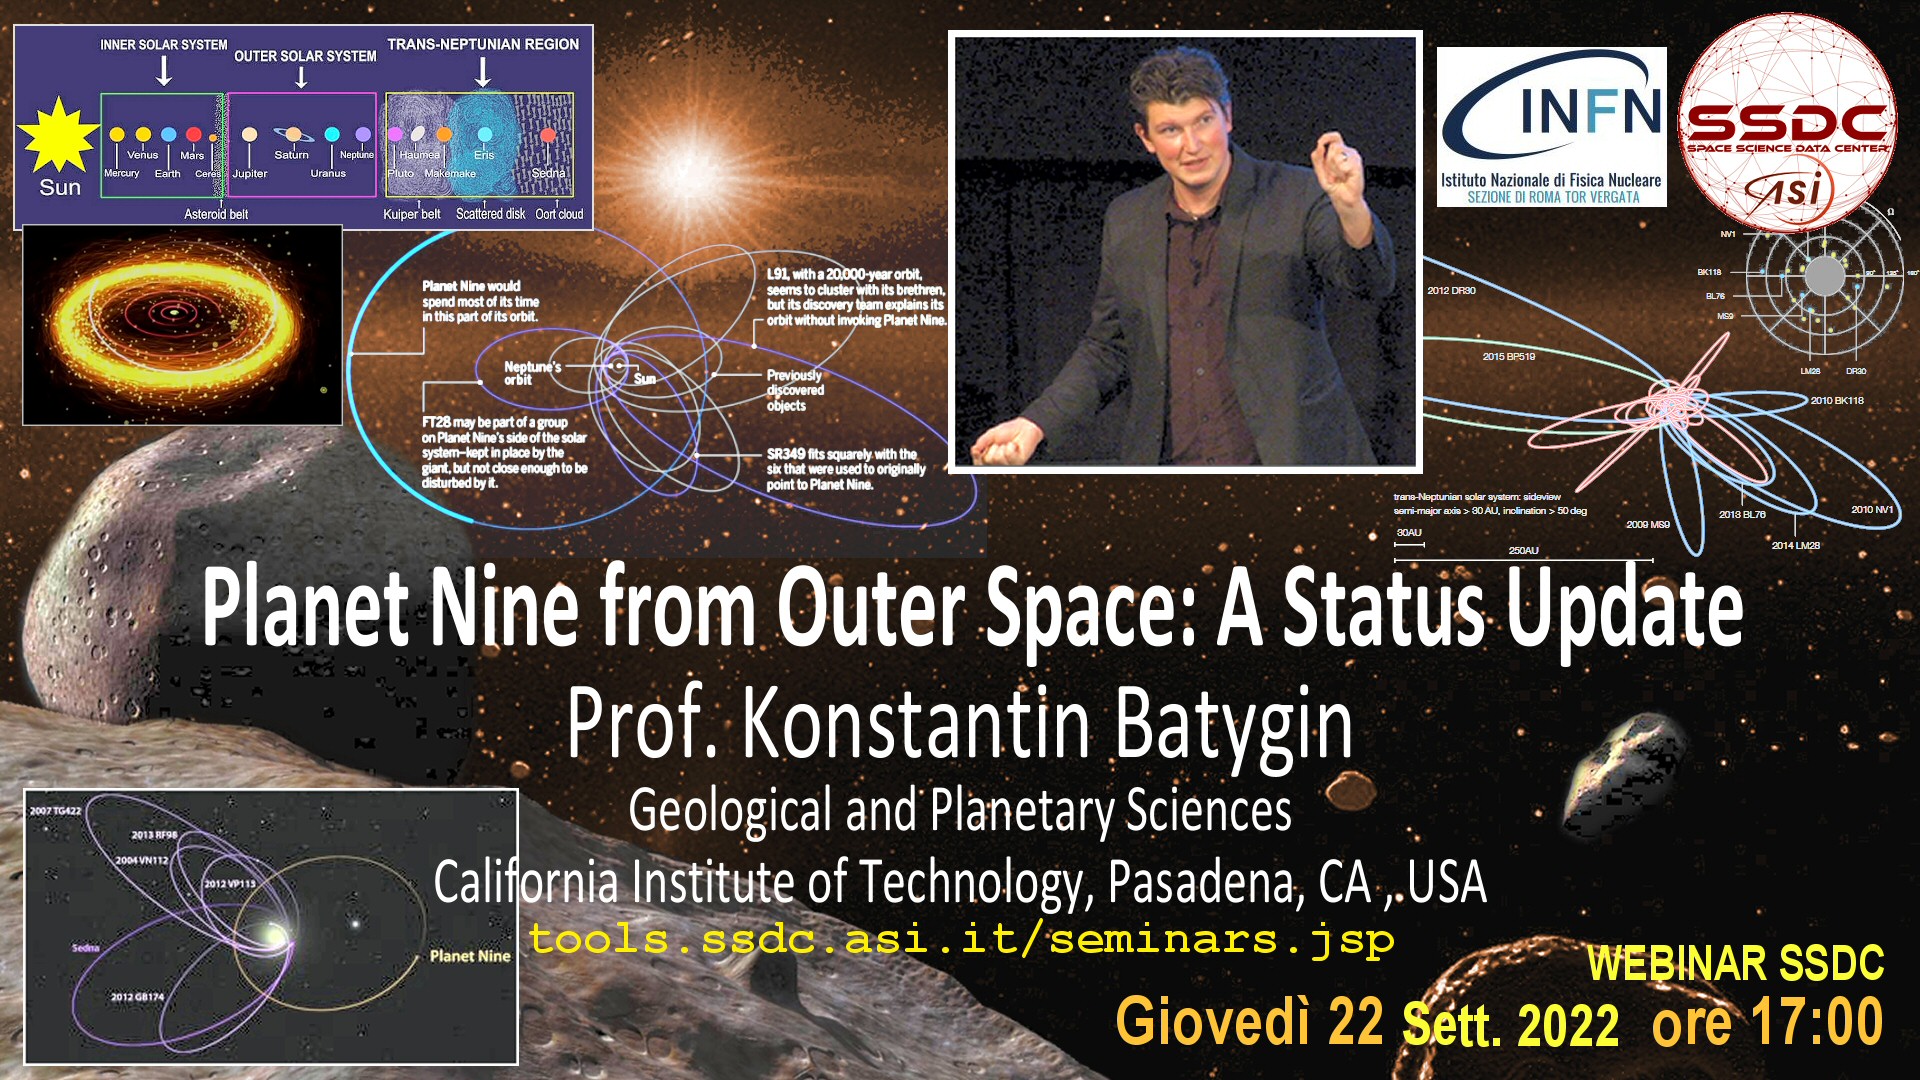 ASI - Seminario “Planet Nine from Outer Space: A Status Update”